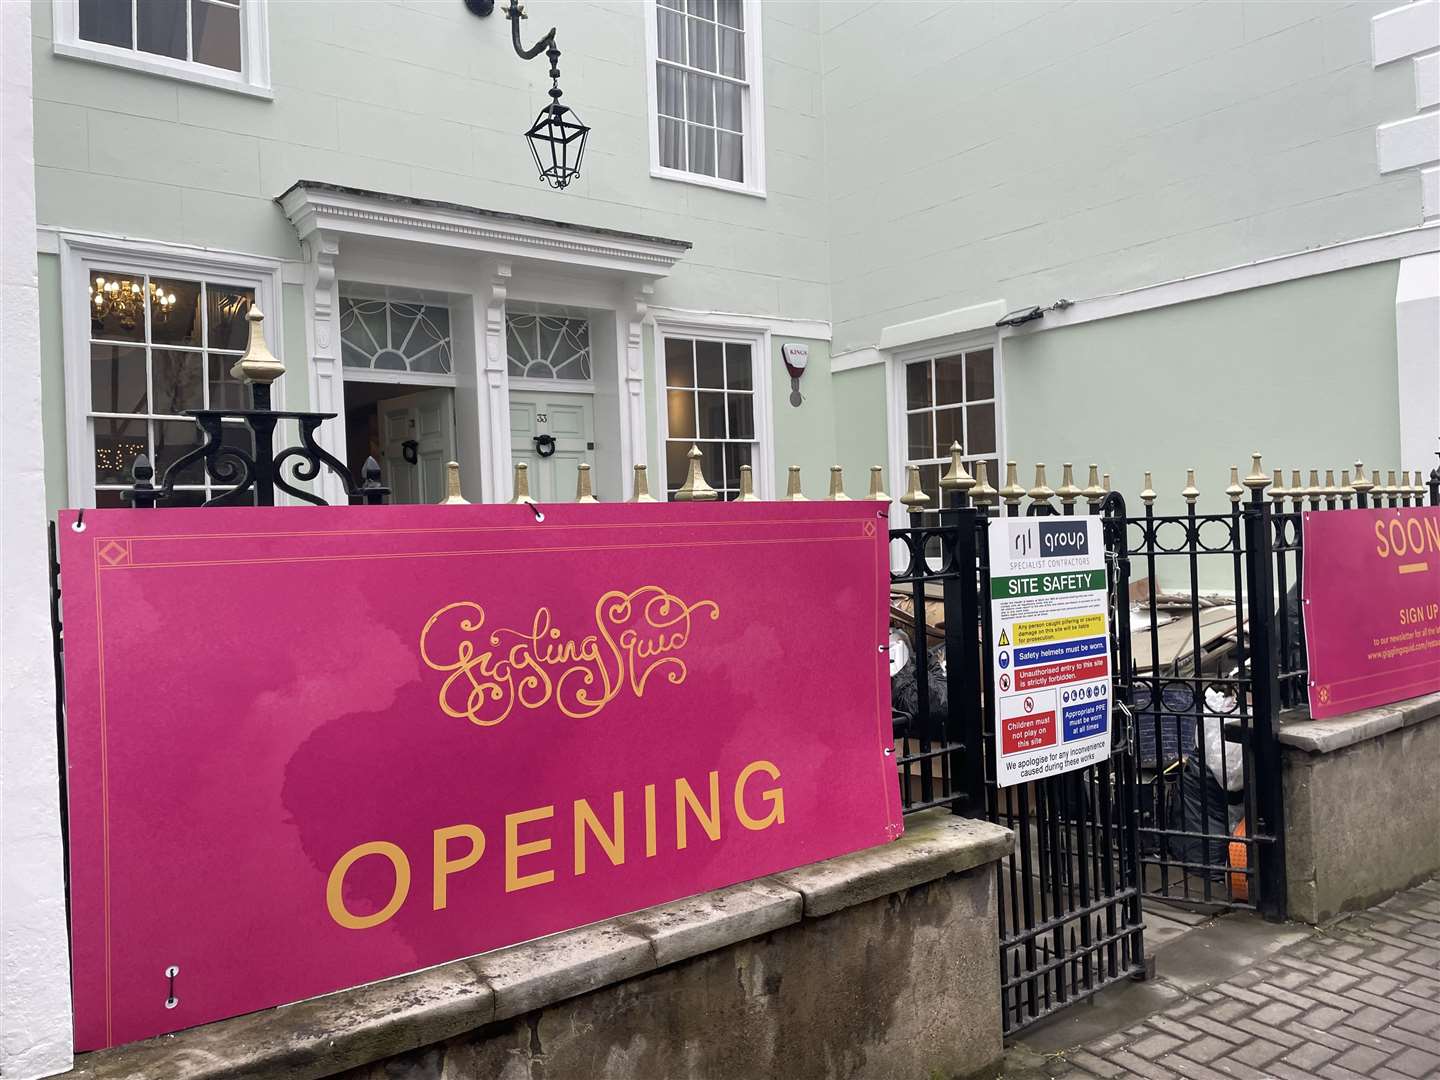 The Giggling Squid Thai restaurant is opening in Earl Street, Maidstone